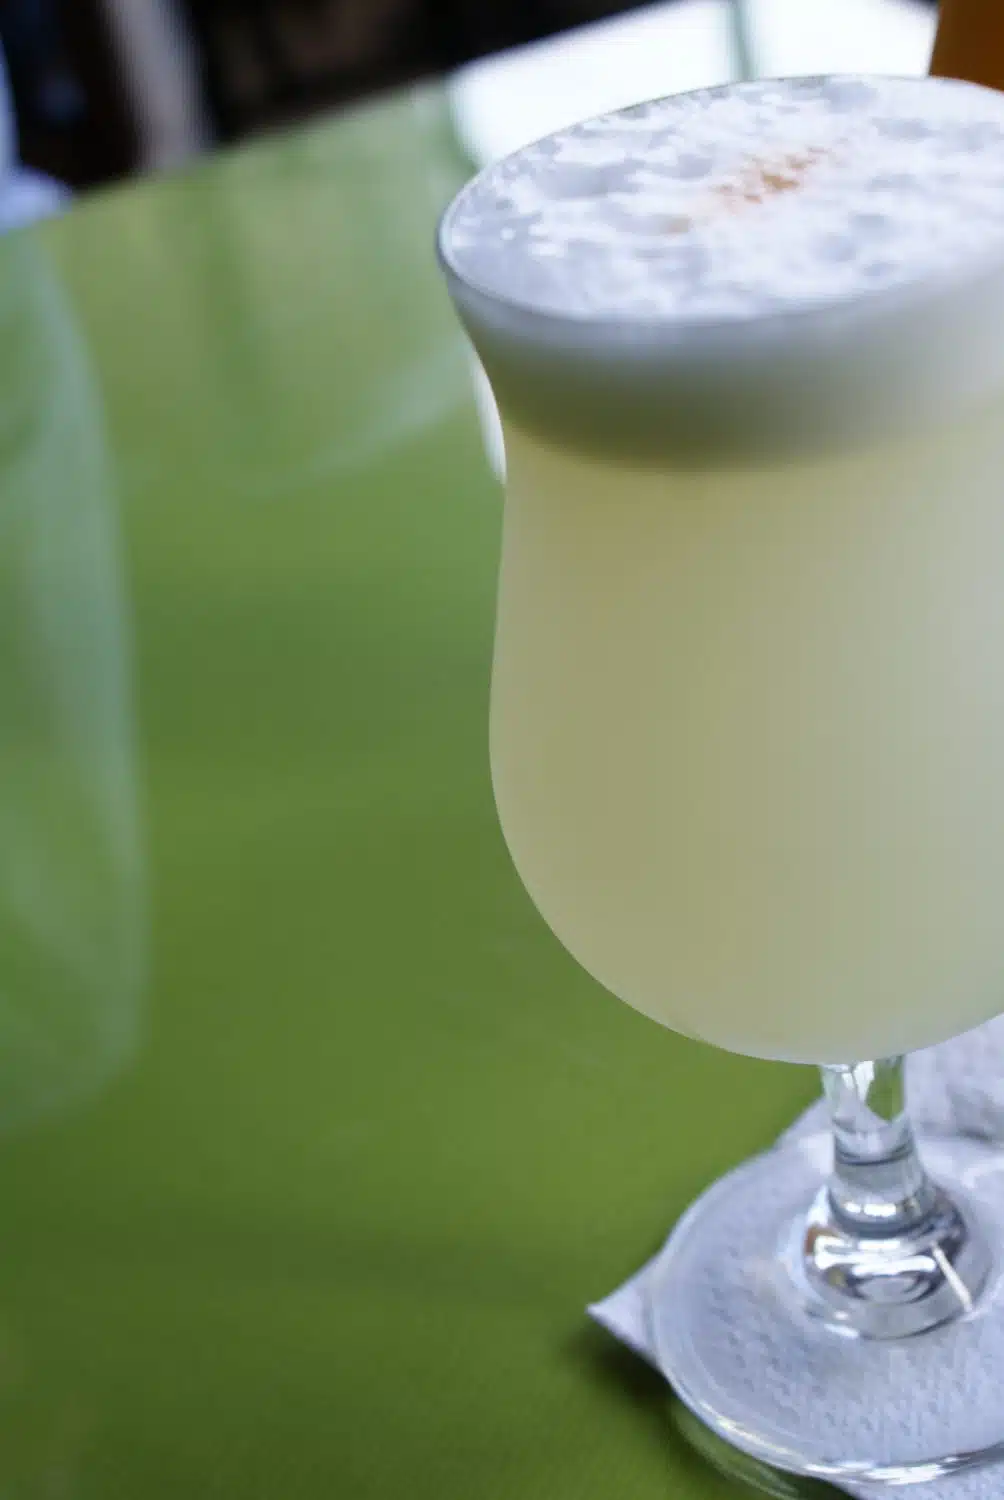 Pisco Sours I South America Travel Bucket List. 90 Awesome Things to do in South America When Backpacking and Travelling #southamerica #bucketlist #traveldestinations